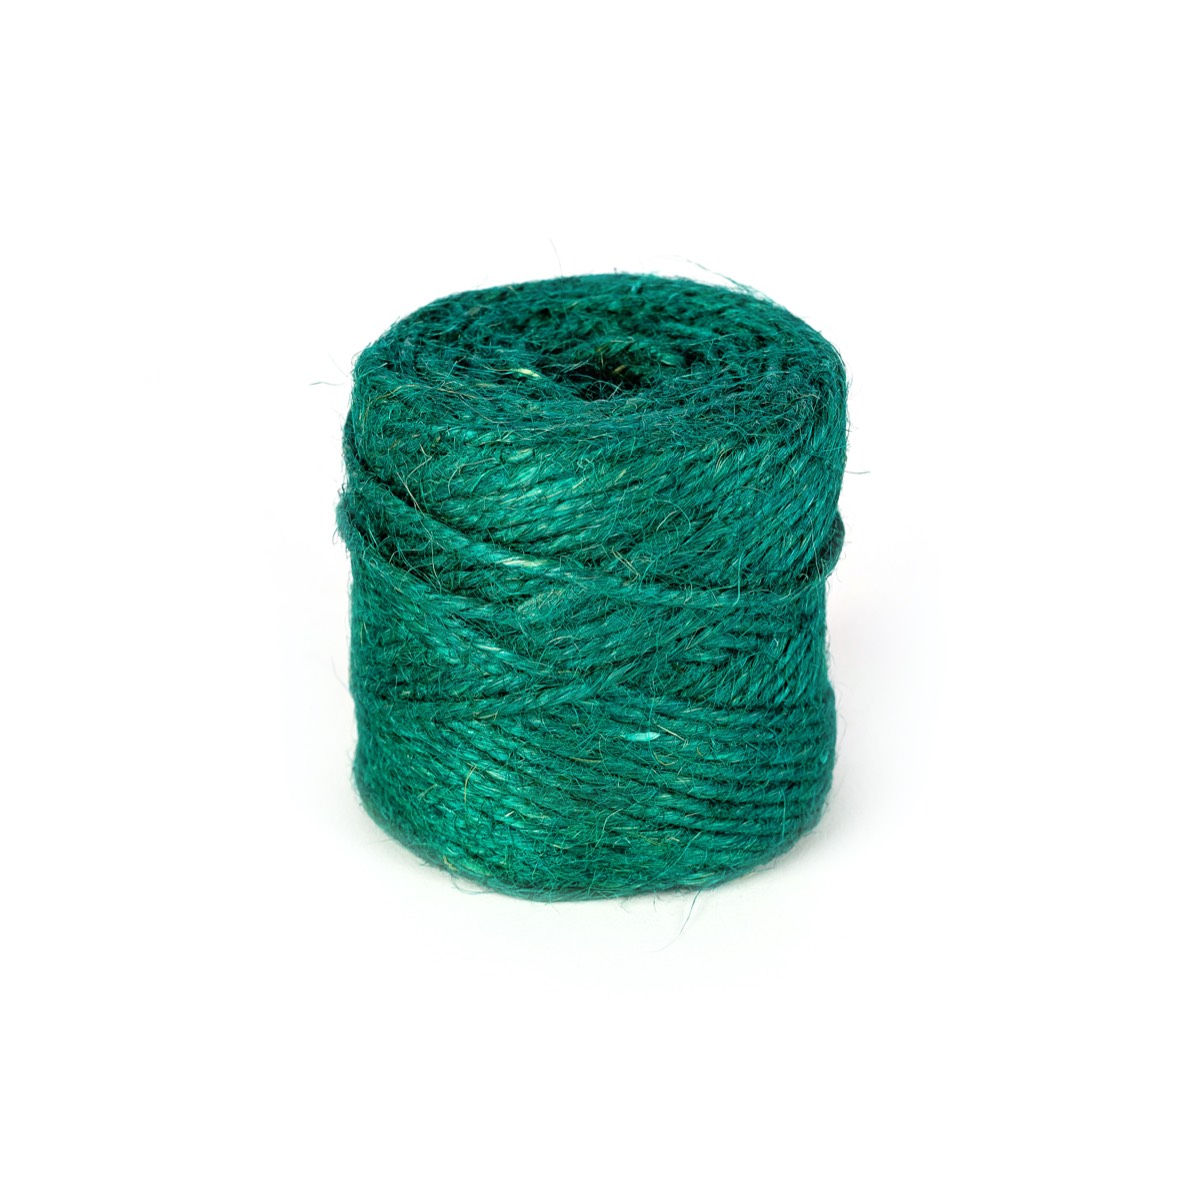 Green Jute Twine - 2mm - 3 Ply Premium Strong Natural Twine - 50